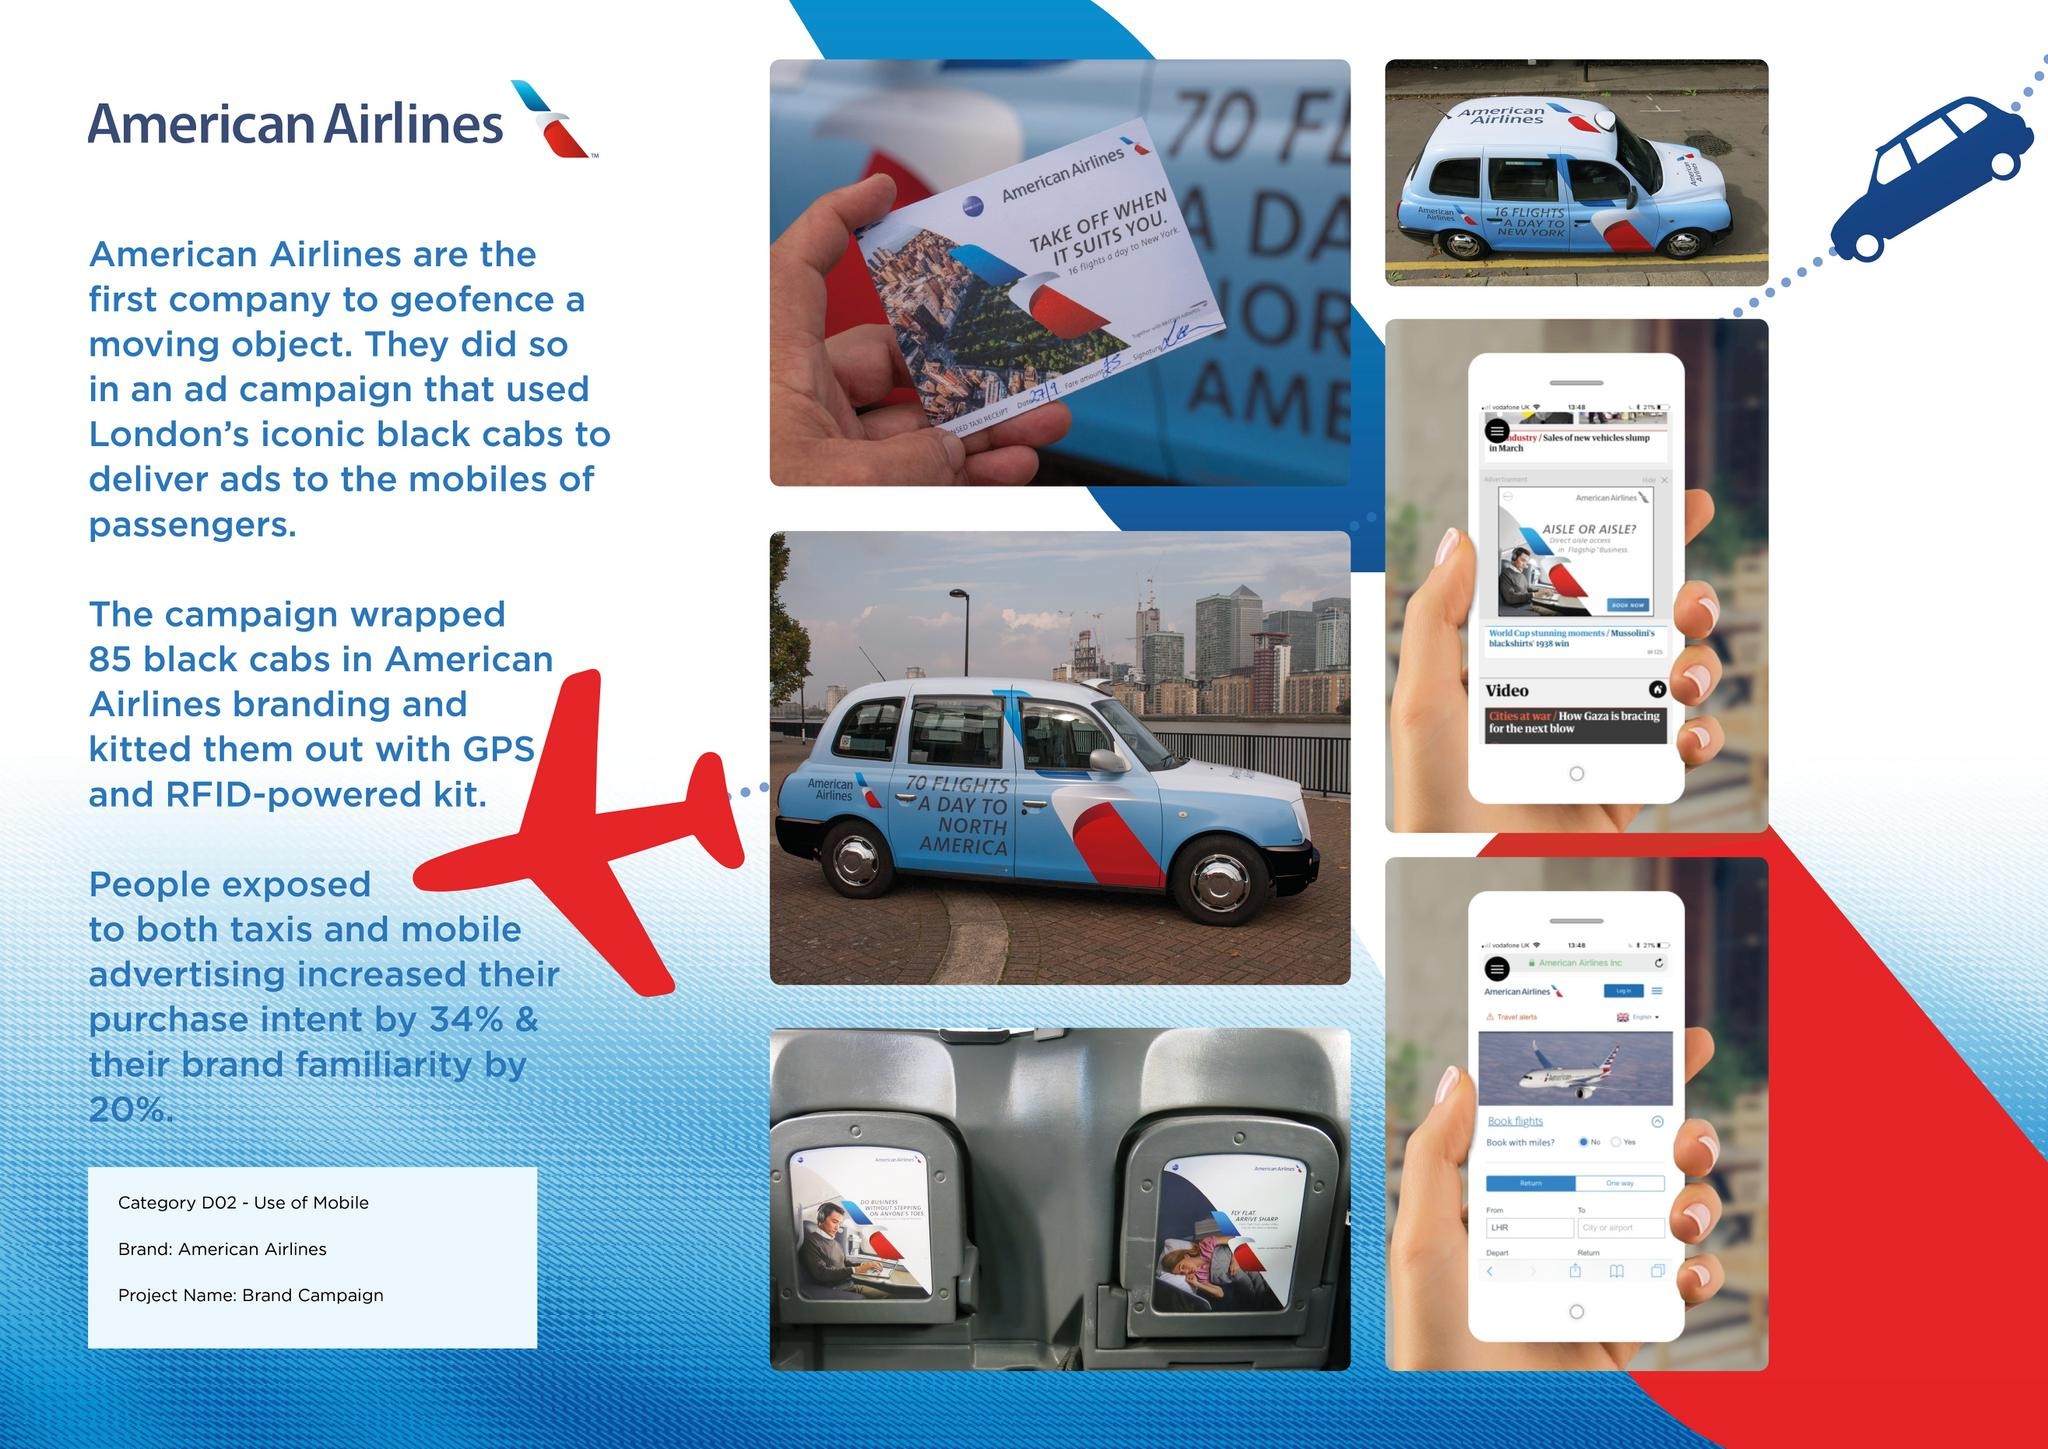 American Airlines: Brand Campaign